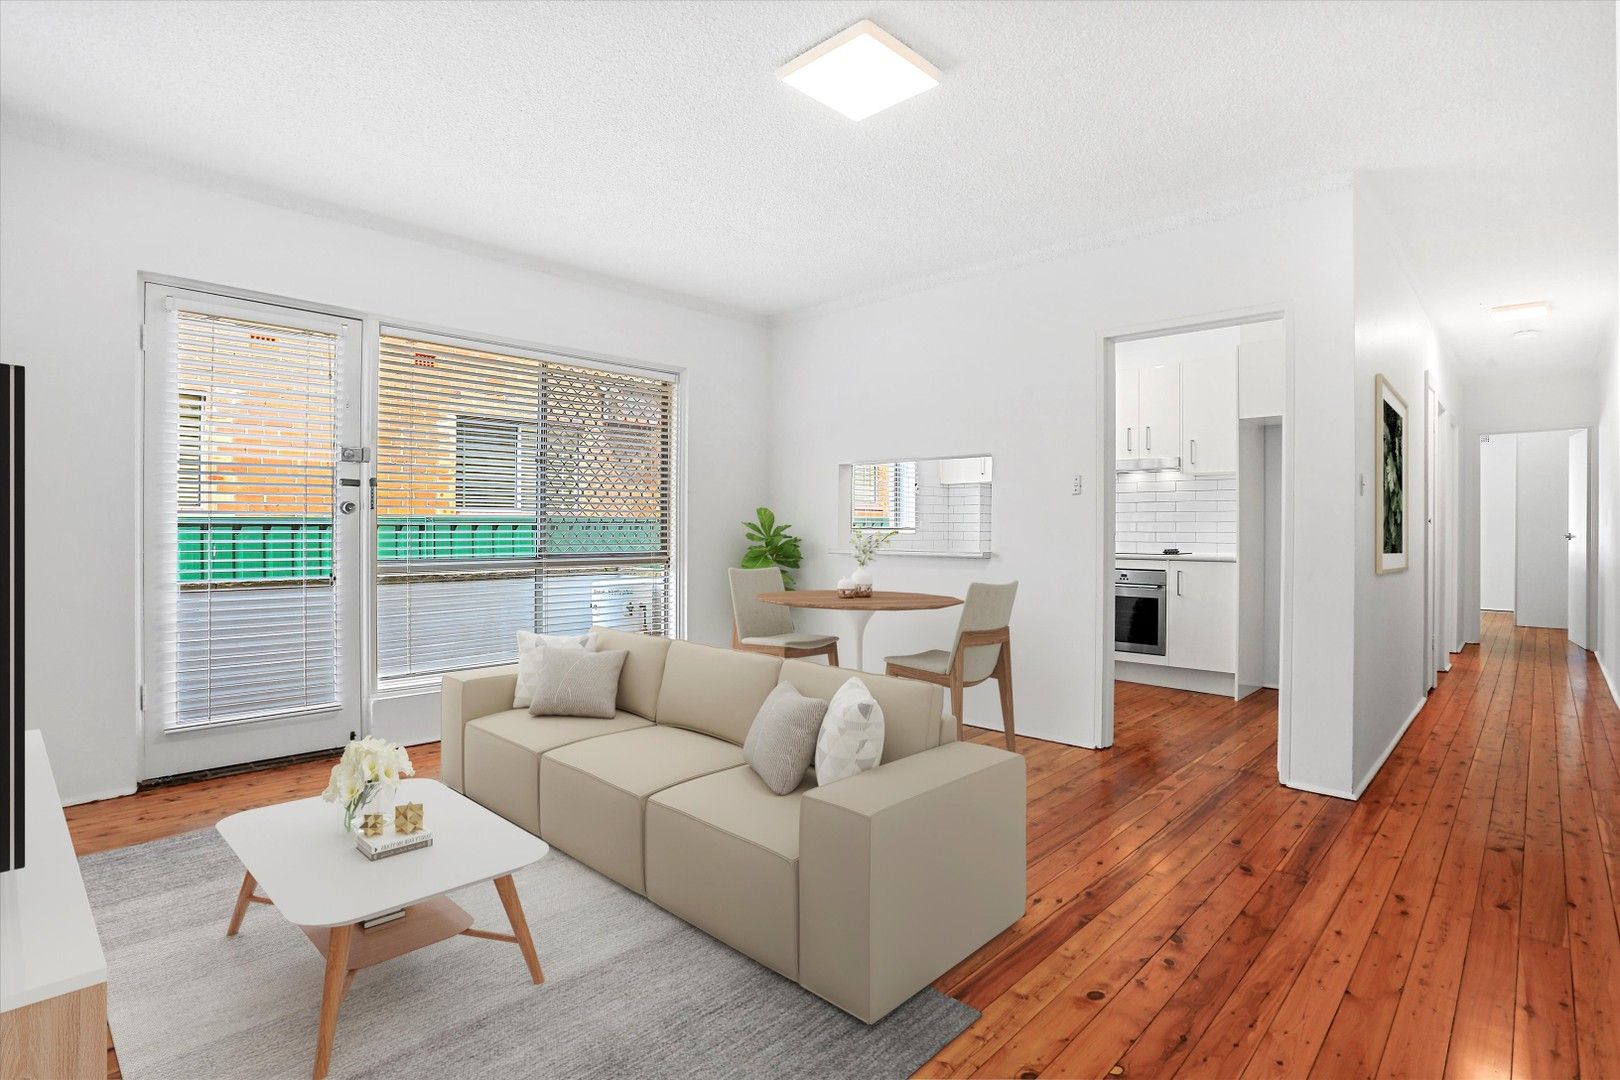 2 bedrooms Apartment / Unit / Flat in 1/37 Palace Street ASHFIELD NSW, 2131